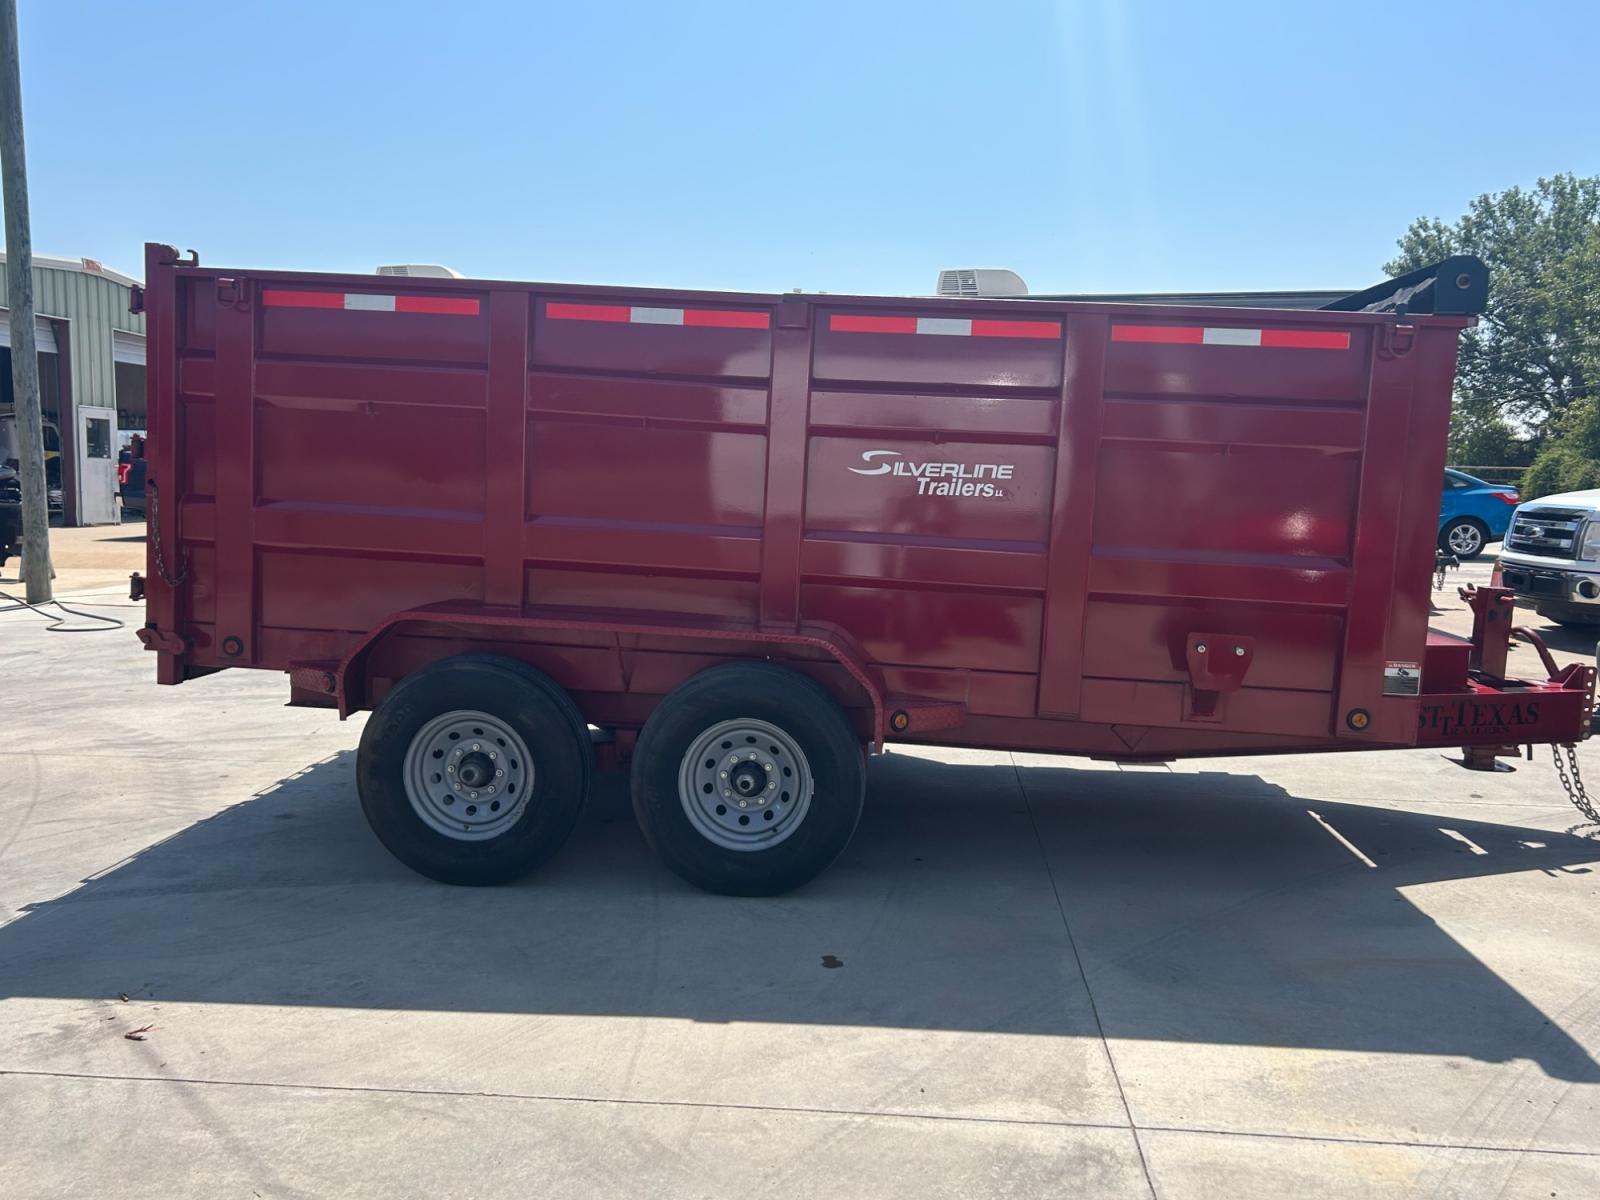 2022 RED EAST TEXAS TRAILER DUMPBED (58SBD1420NE) , located at 17760 Hwy 62, Morris, OK, 74445, 35.609104, -95.877060 - 2022 SILVERLINE TRAILER 83X14 FEATURES 2 7,000 LB DEXTER SPRING AXLES, 2 ELEC FSA BRAKES, COUPLER 2-5/16" ADJUSTABLE (6 HOLE), DIAMOND PLATE FENDERS, 16" CROSS-MEMBERS, 48" DUMP SIDES, 48" 3 WAY GATE, MESH ROLL TARP SYSTEM, JACK SPRING LOADED DROP LEG, 4 3'' D-RINGS, TOOL BOX IN TONGUE, SCISSOR HOIS - Photo #3